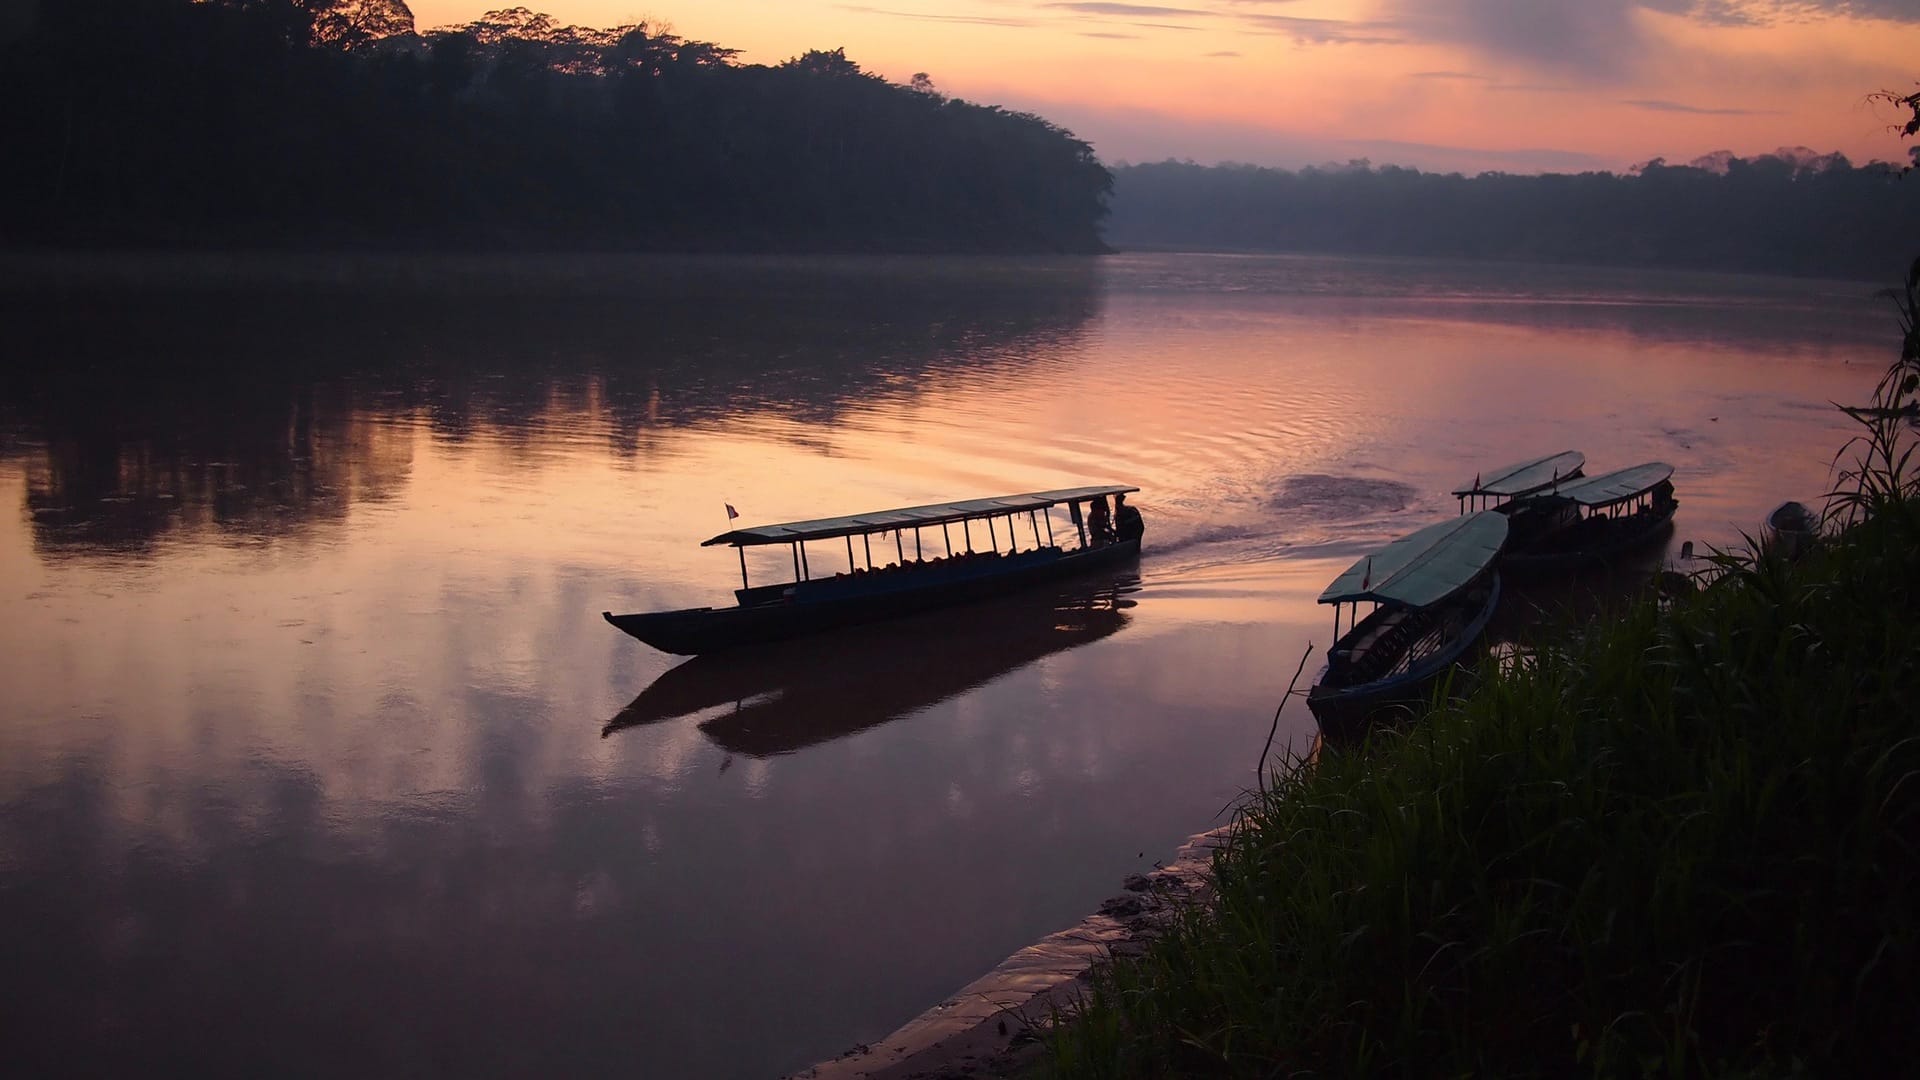 A boat navigating the Tambopata river during sunrise in the Amazon rainforest in Peru.